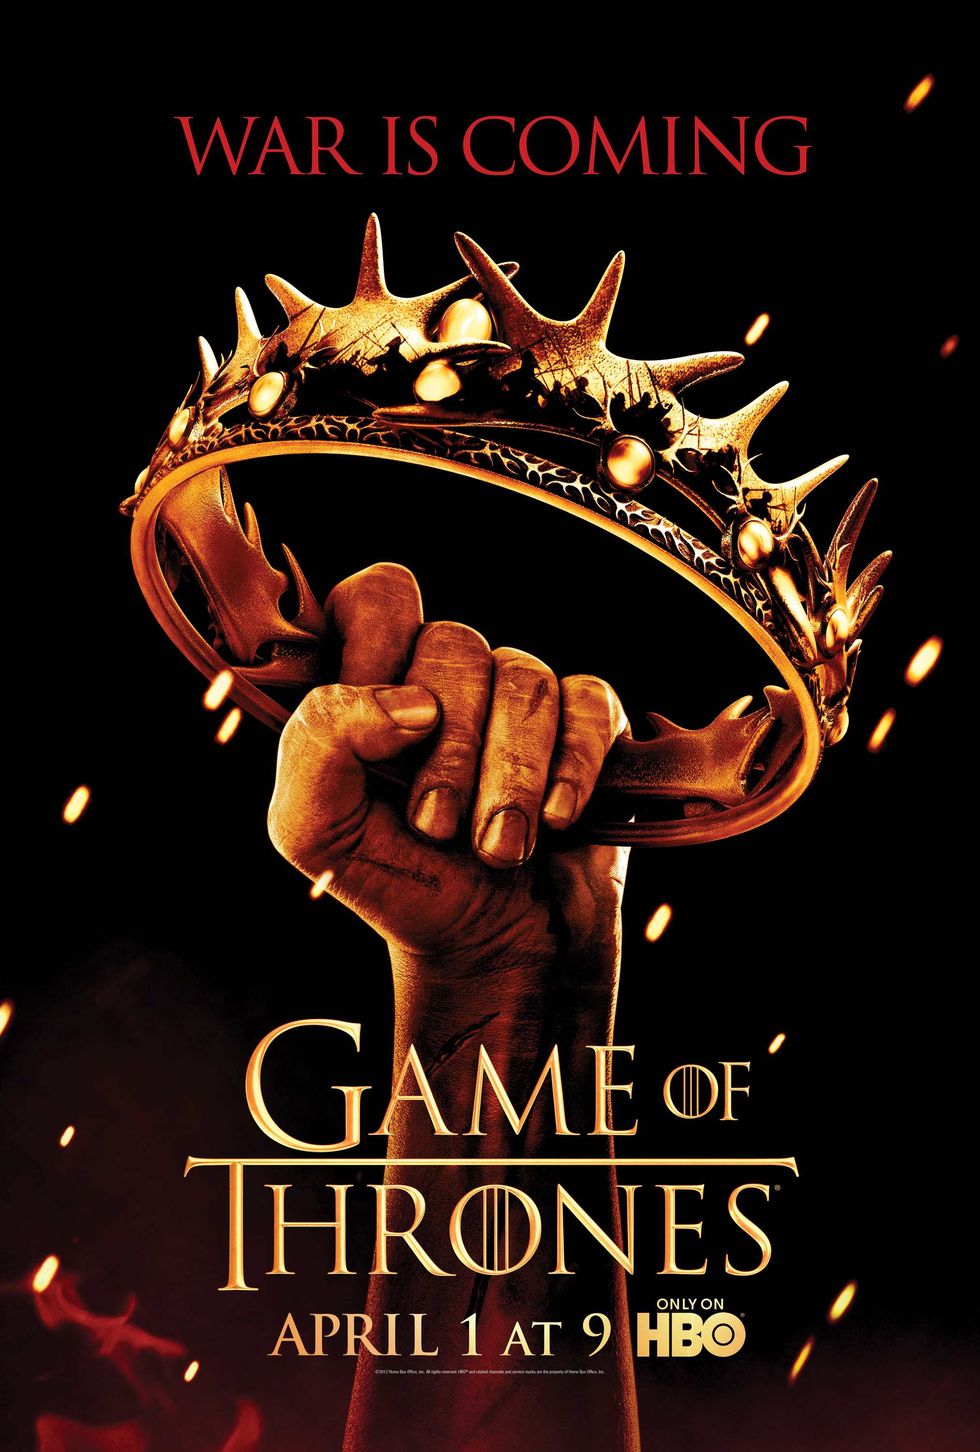 Game of Thrones Season 8 Poster - Exclusive Design - High Quality Prints